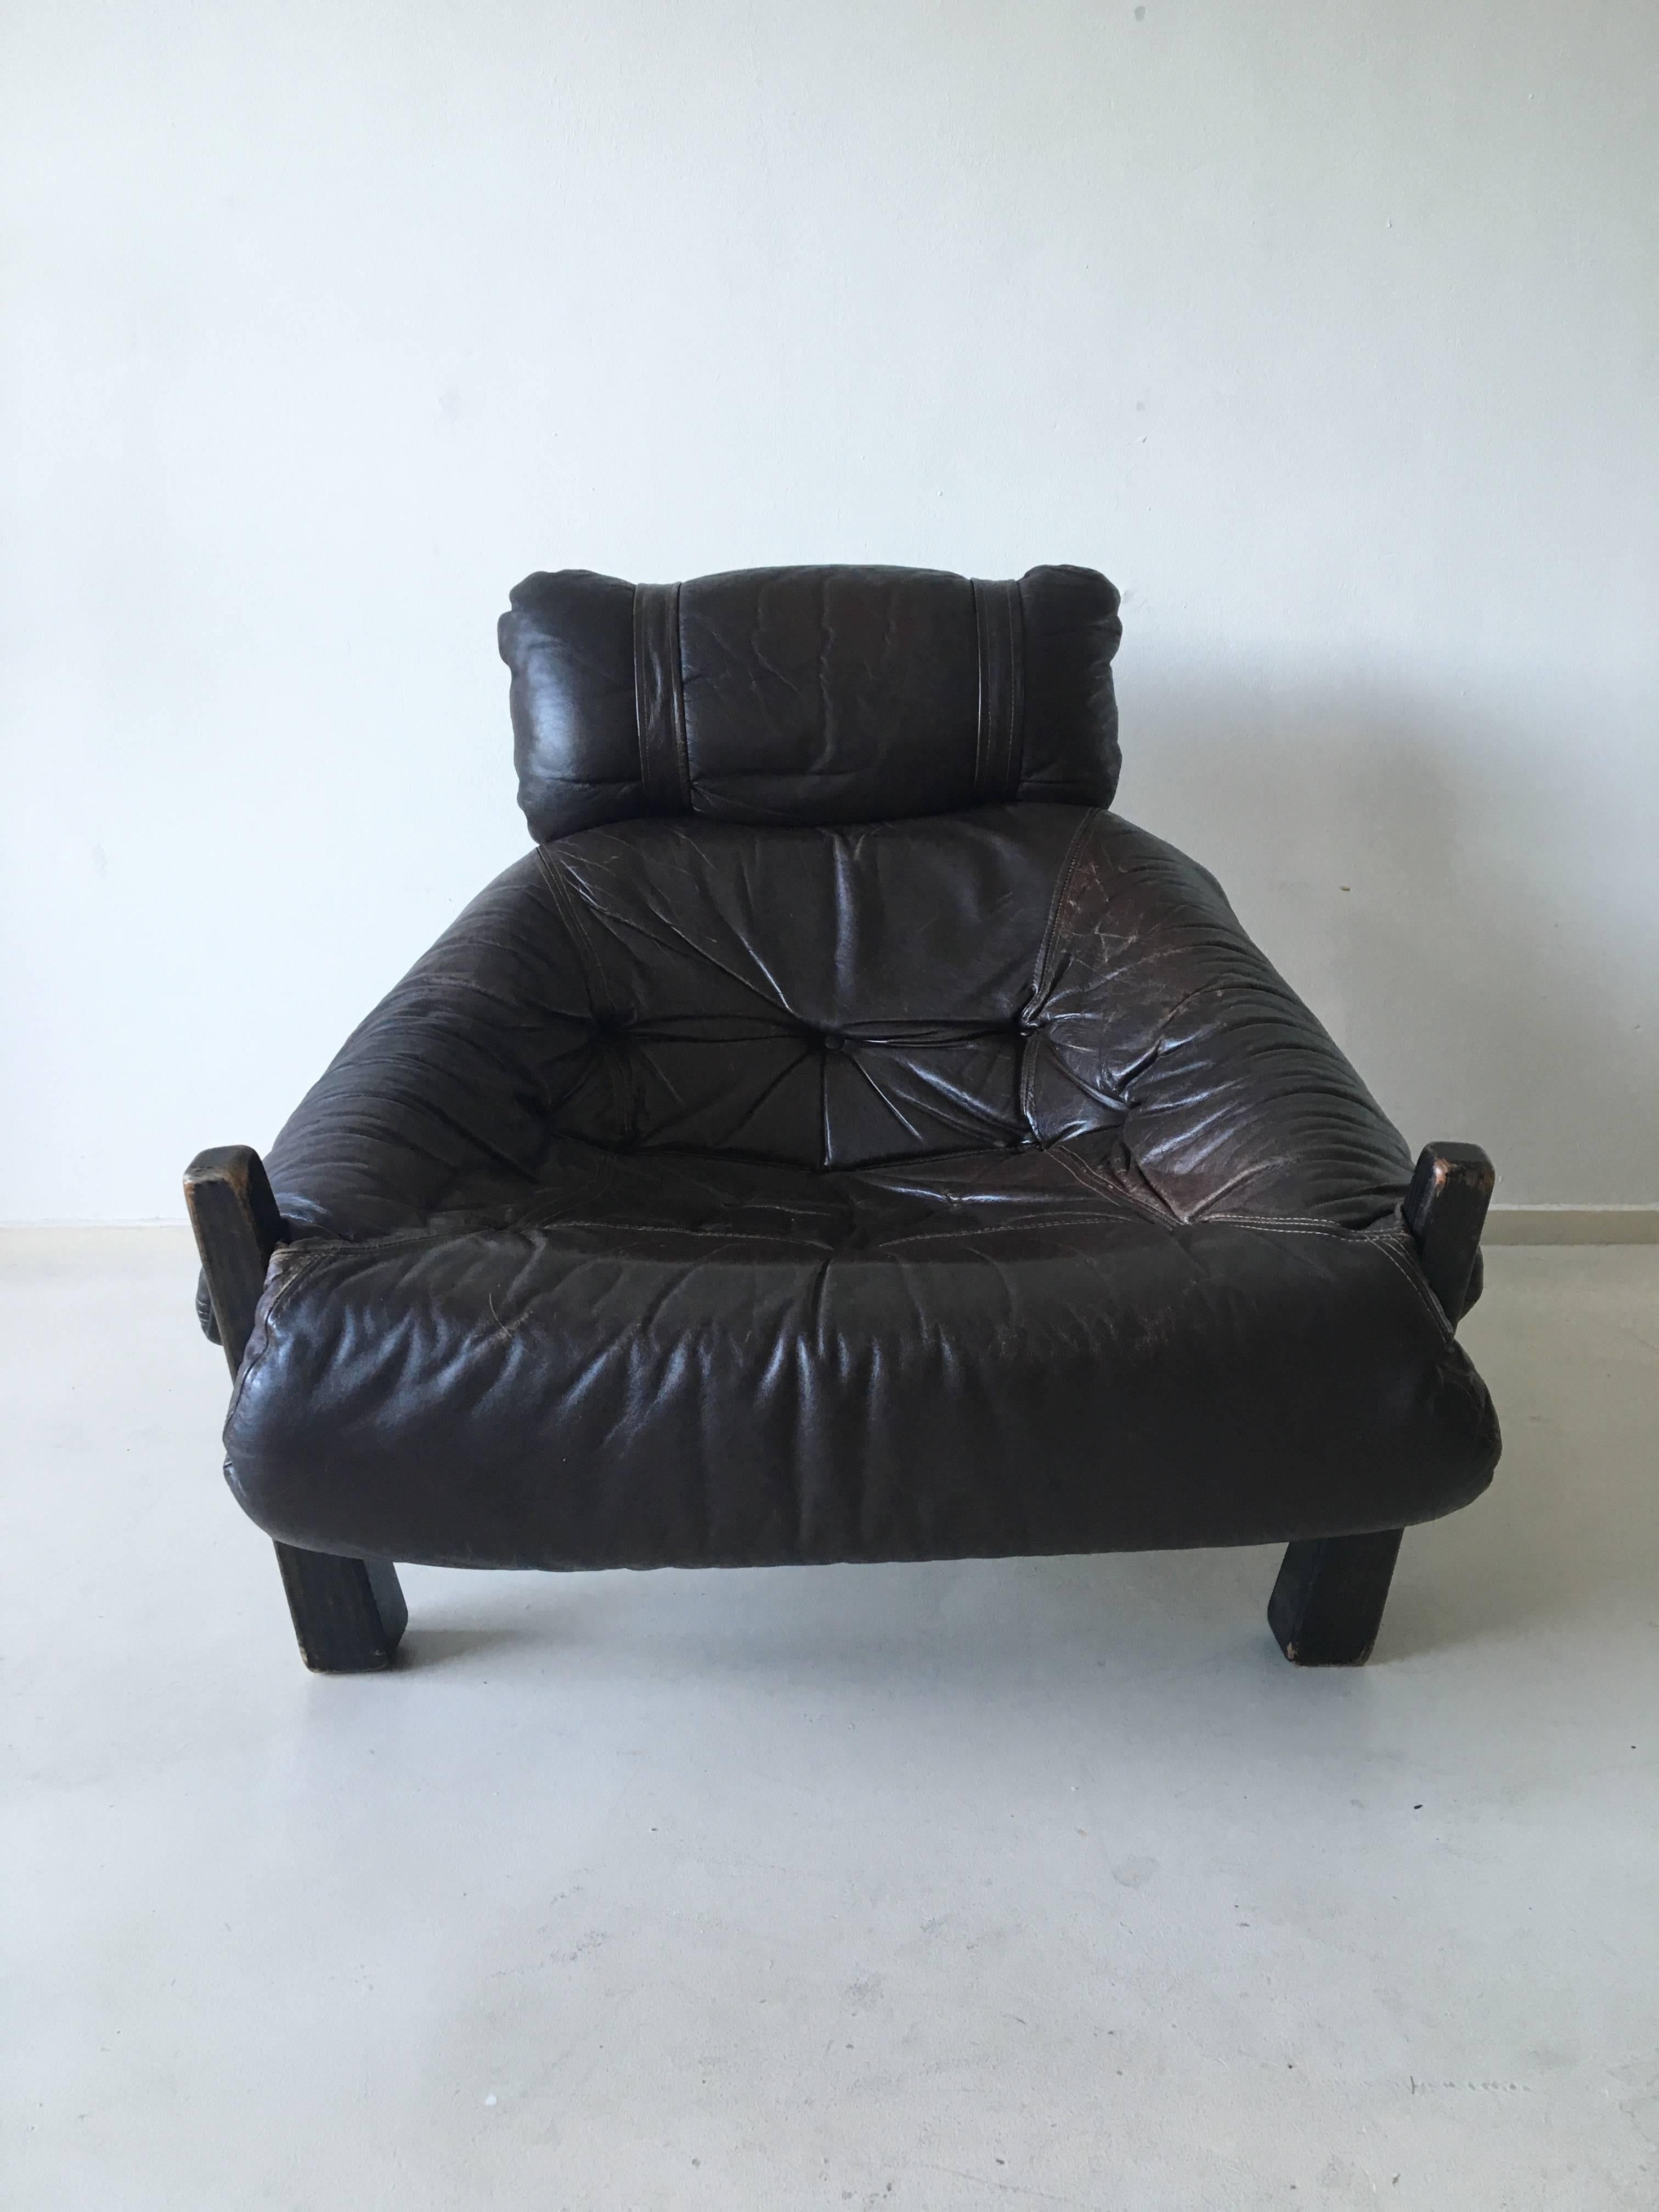 Comfortable lounge chair in style of Percival Lafer. This gorgeous design consists of a brown lacquered wooden frame and leather and fabric upholstery. Some signs of age and use. A few buttons missing. 